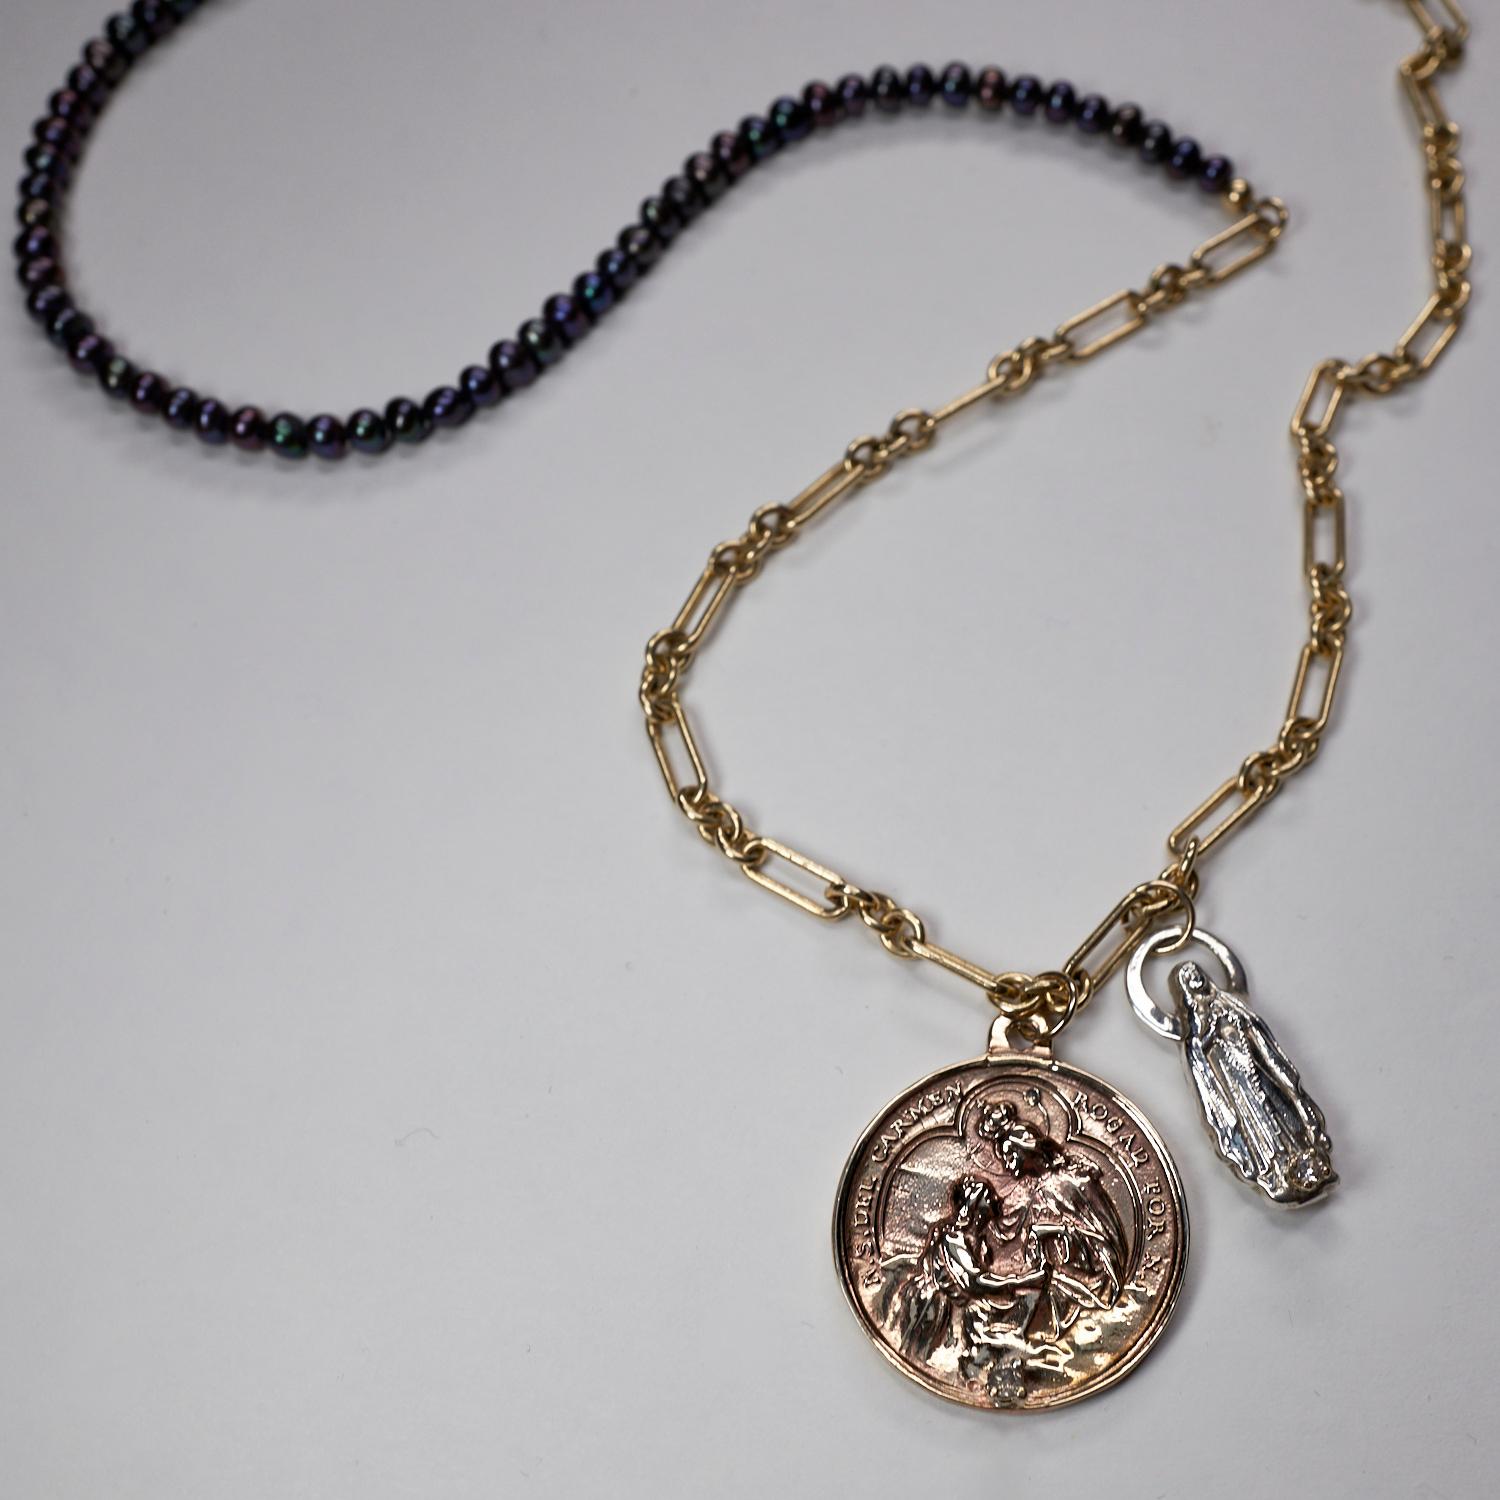 Chain Necklace Medal Coin Virgin Mary White Diamond Black Pearl Chunky J Dauphin

White Diamonds Set in Gold Prongs on Bronze Medal Coin Pendant and a Sterling Silver Virgin Mary Figurine Hanging on a Black Pearl and Chunky Chain Gold Filled